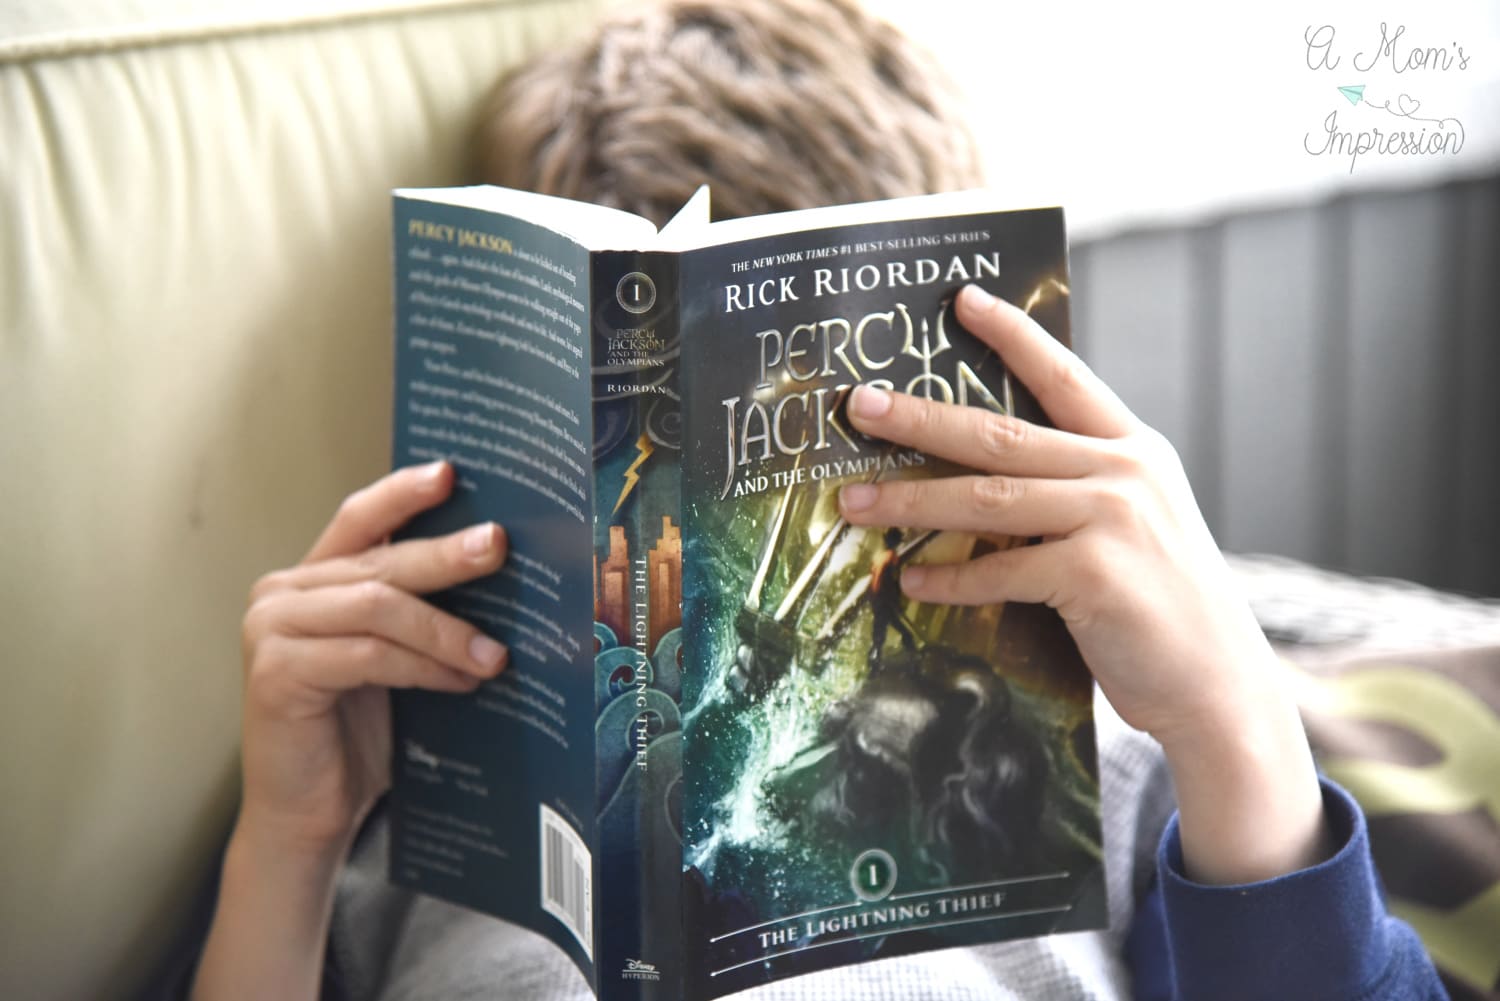 Summer Reading With The Percy Jackson And The Olympians Series Giveaway A Mom S Impression Recipes Crafts Entertainment And Family Travel